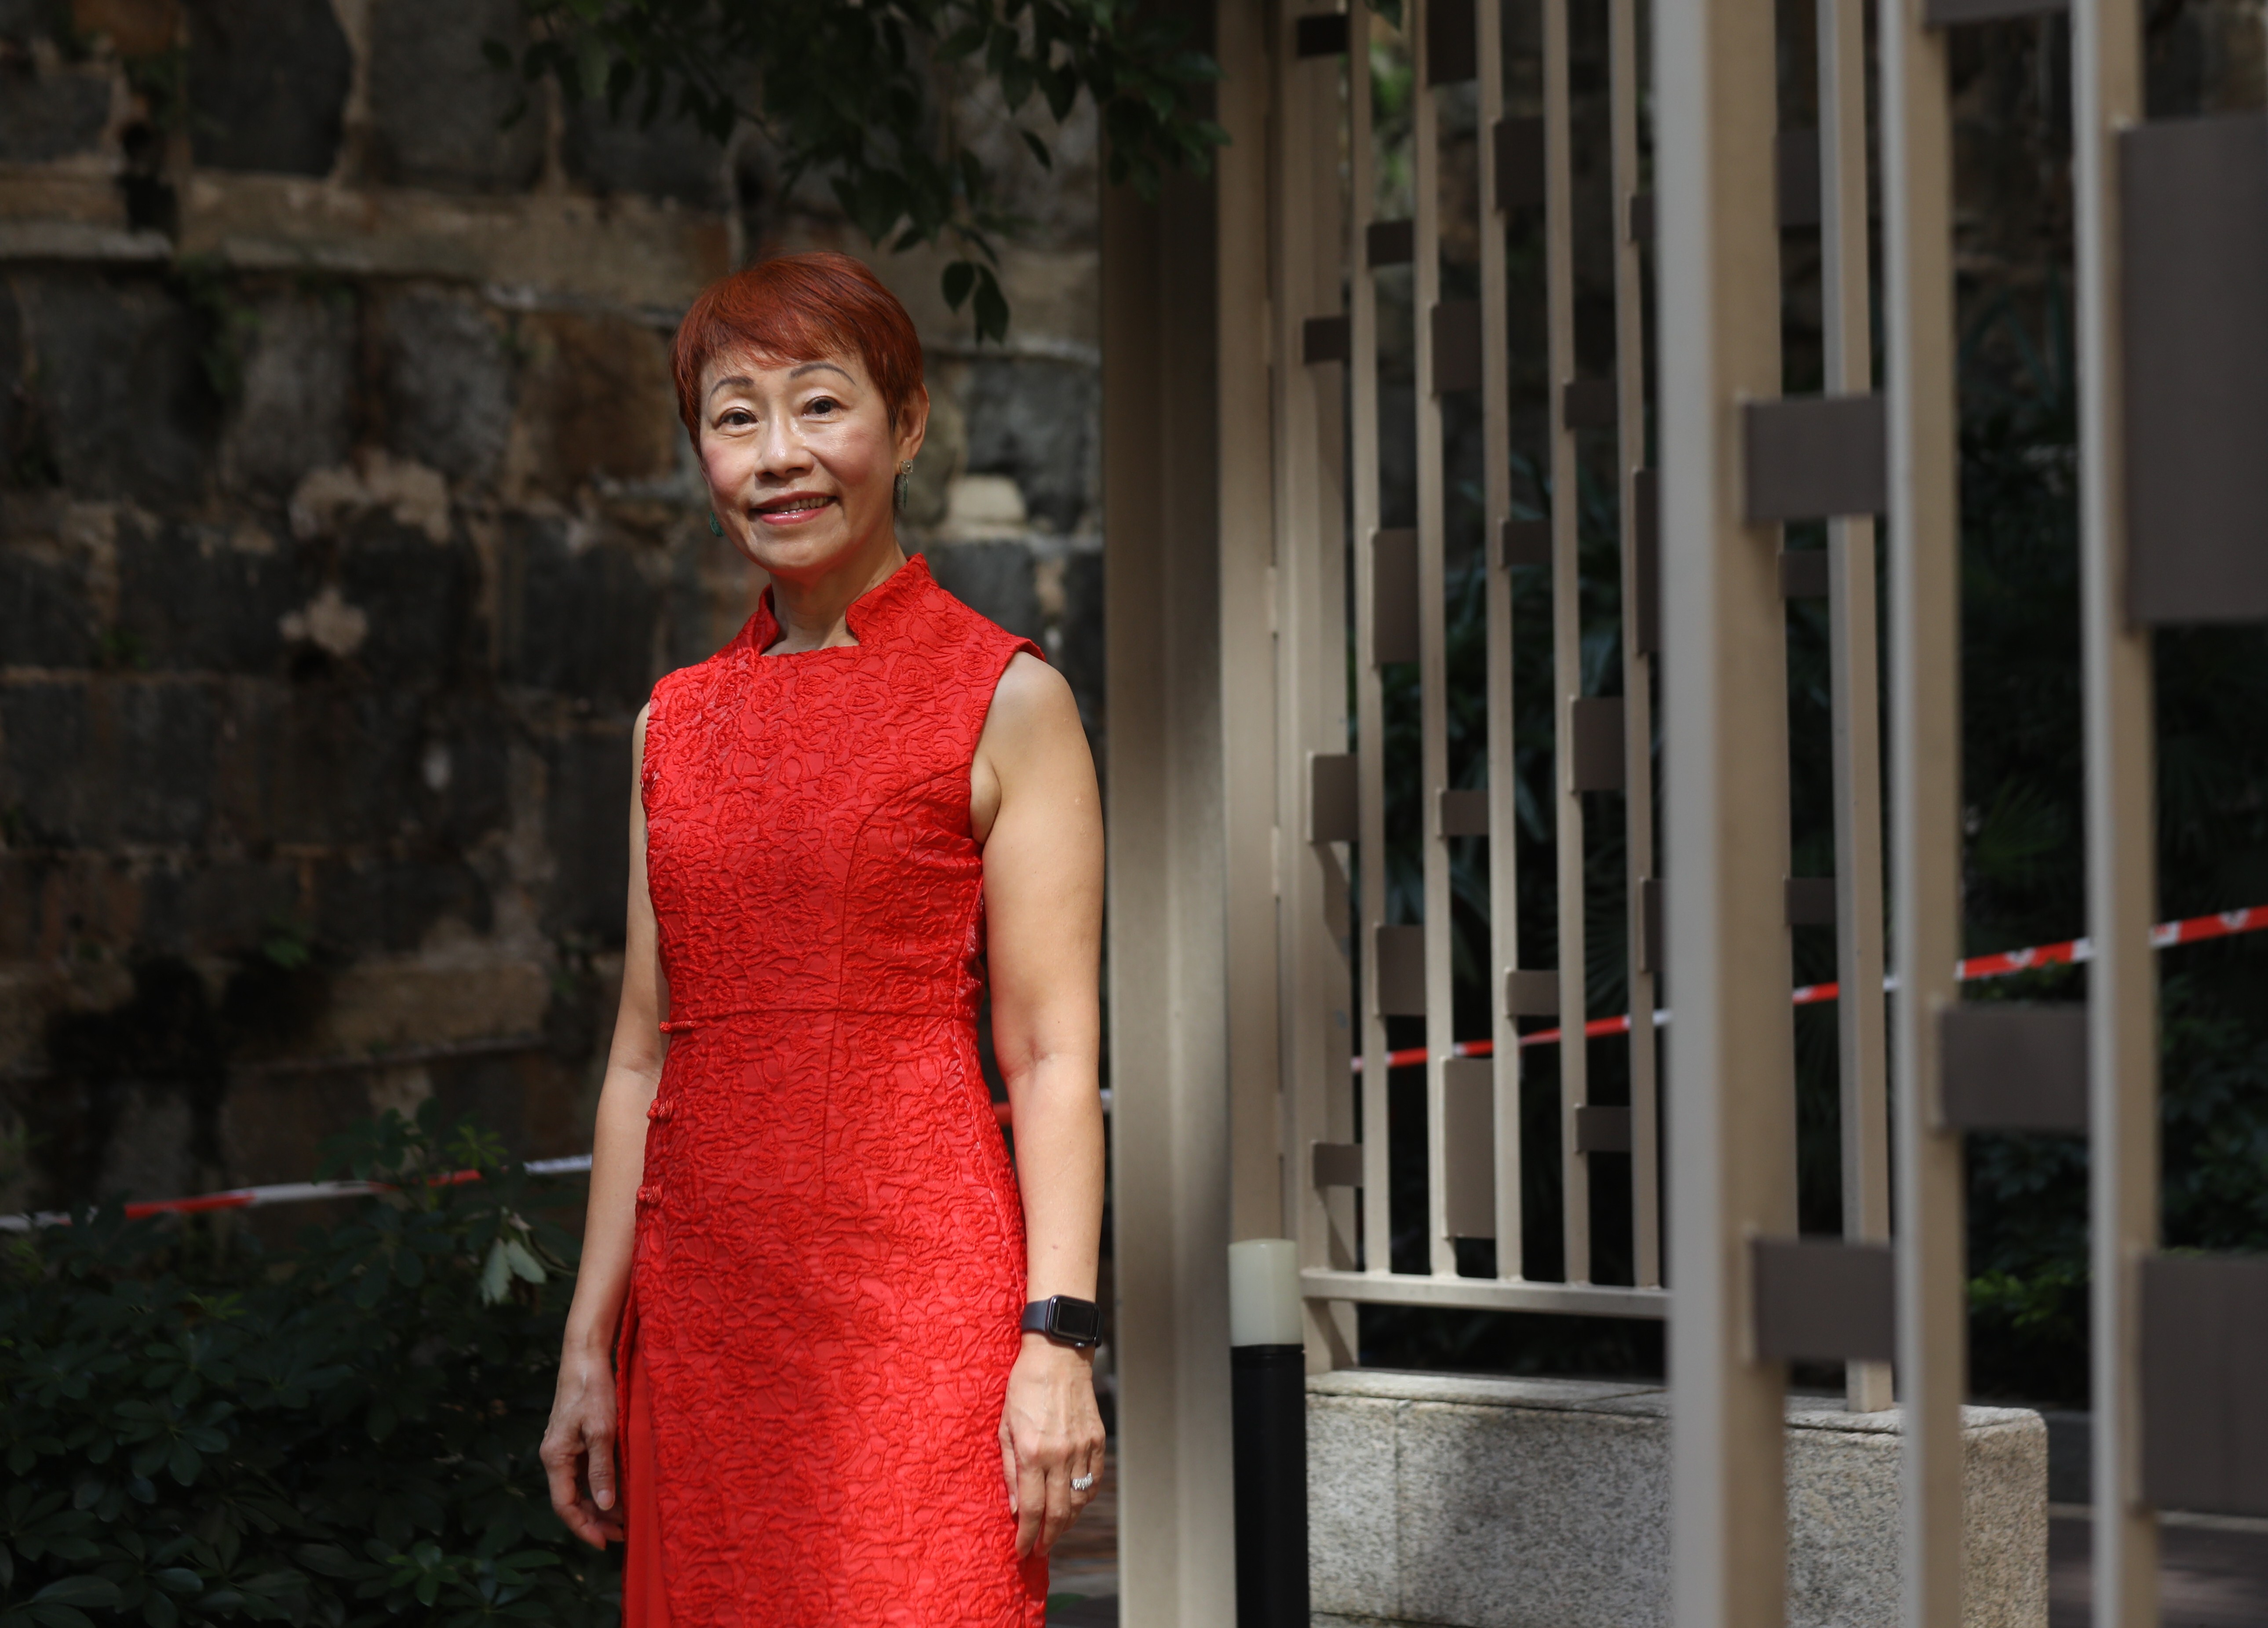 Tan Poh Lee is the founder of Mighty Oaks. Photo: Xiaomei Chen